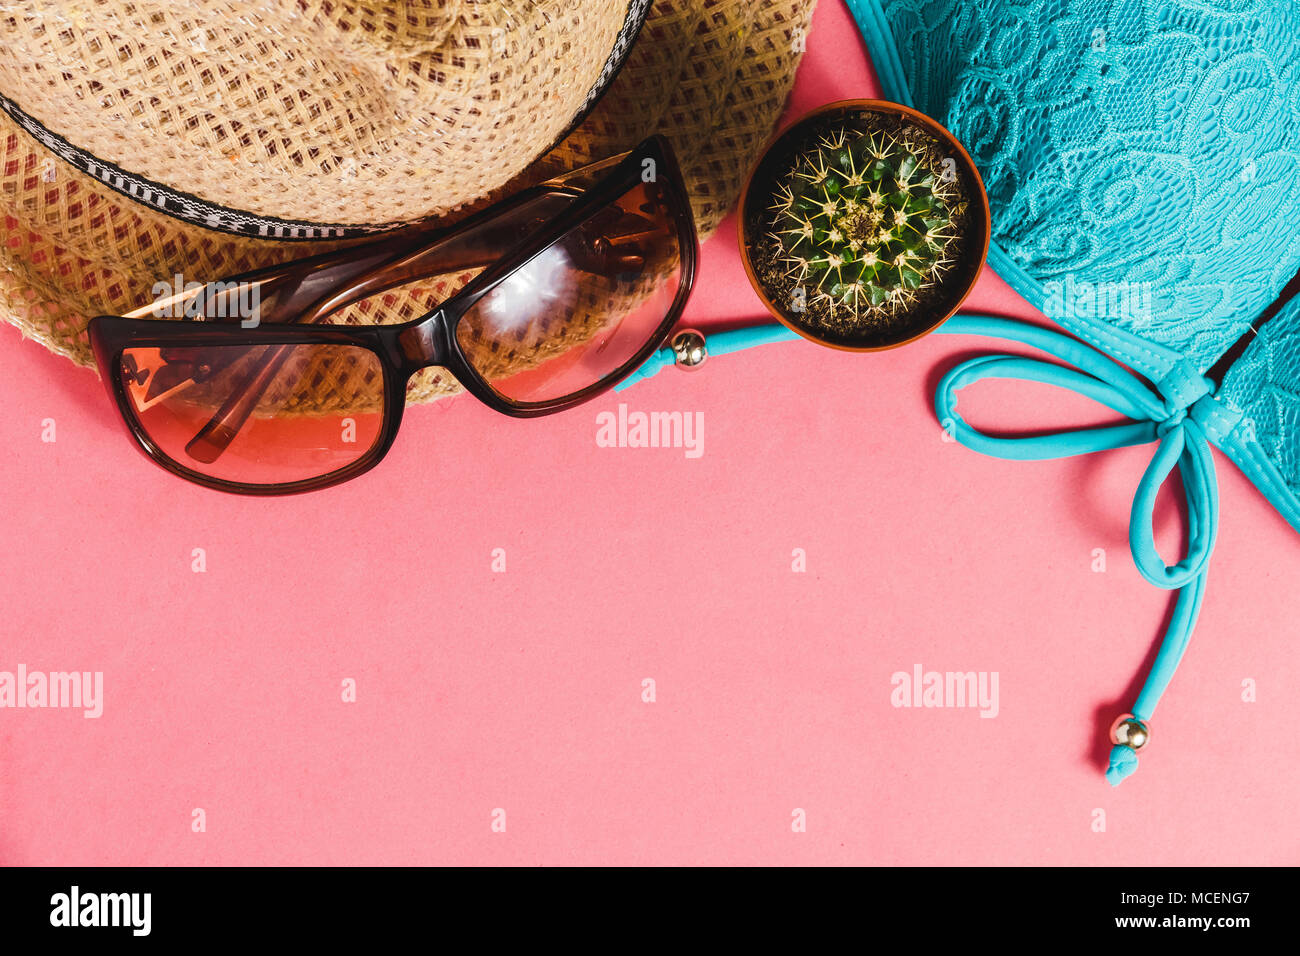 Swimsuit, Hat, Sunglasses, Cactus on Pink Background. Top View Travel Concept with Copyspace Stock Photo